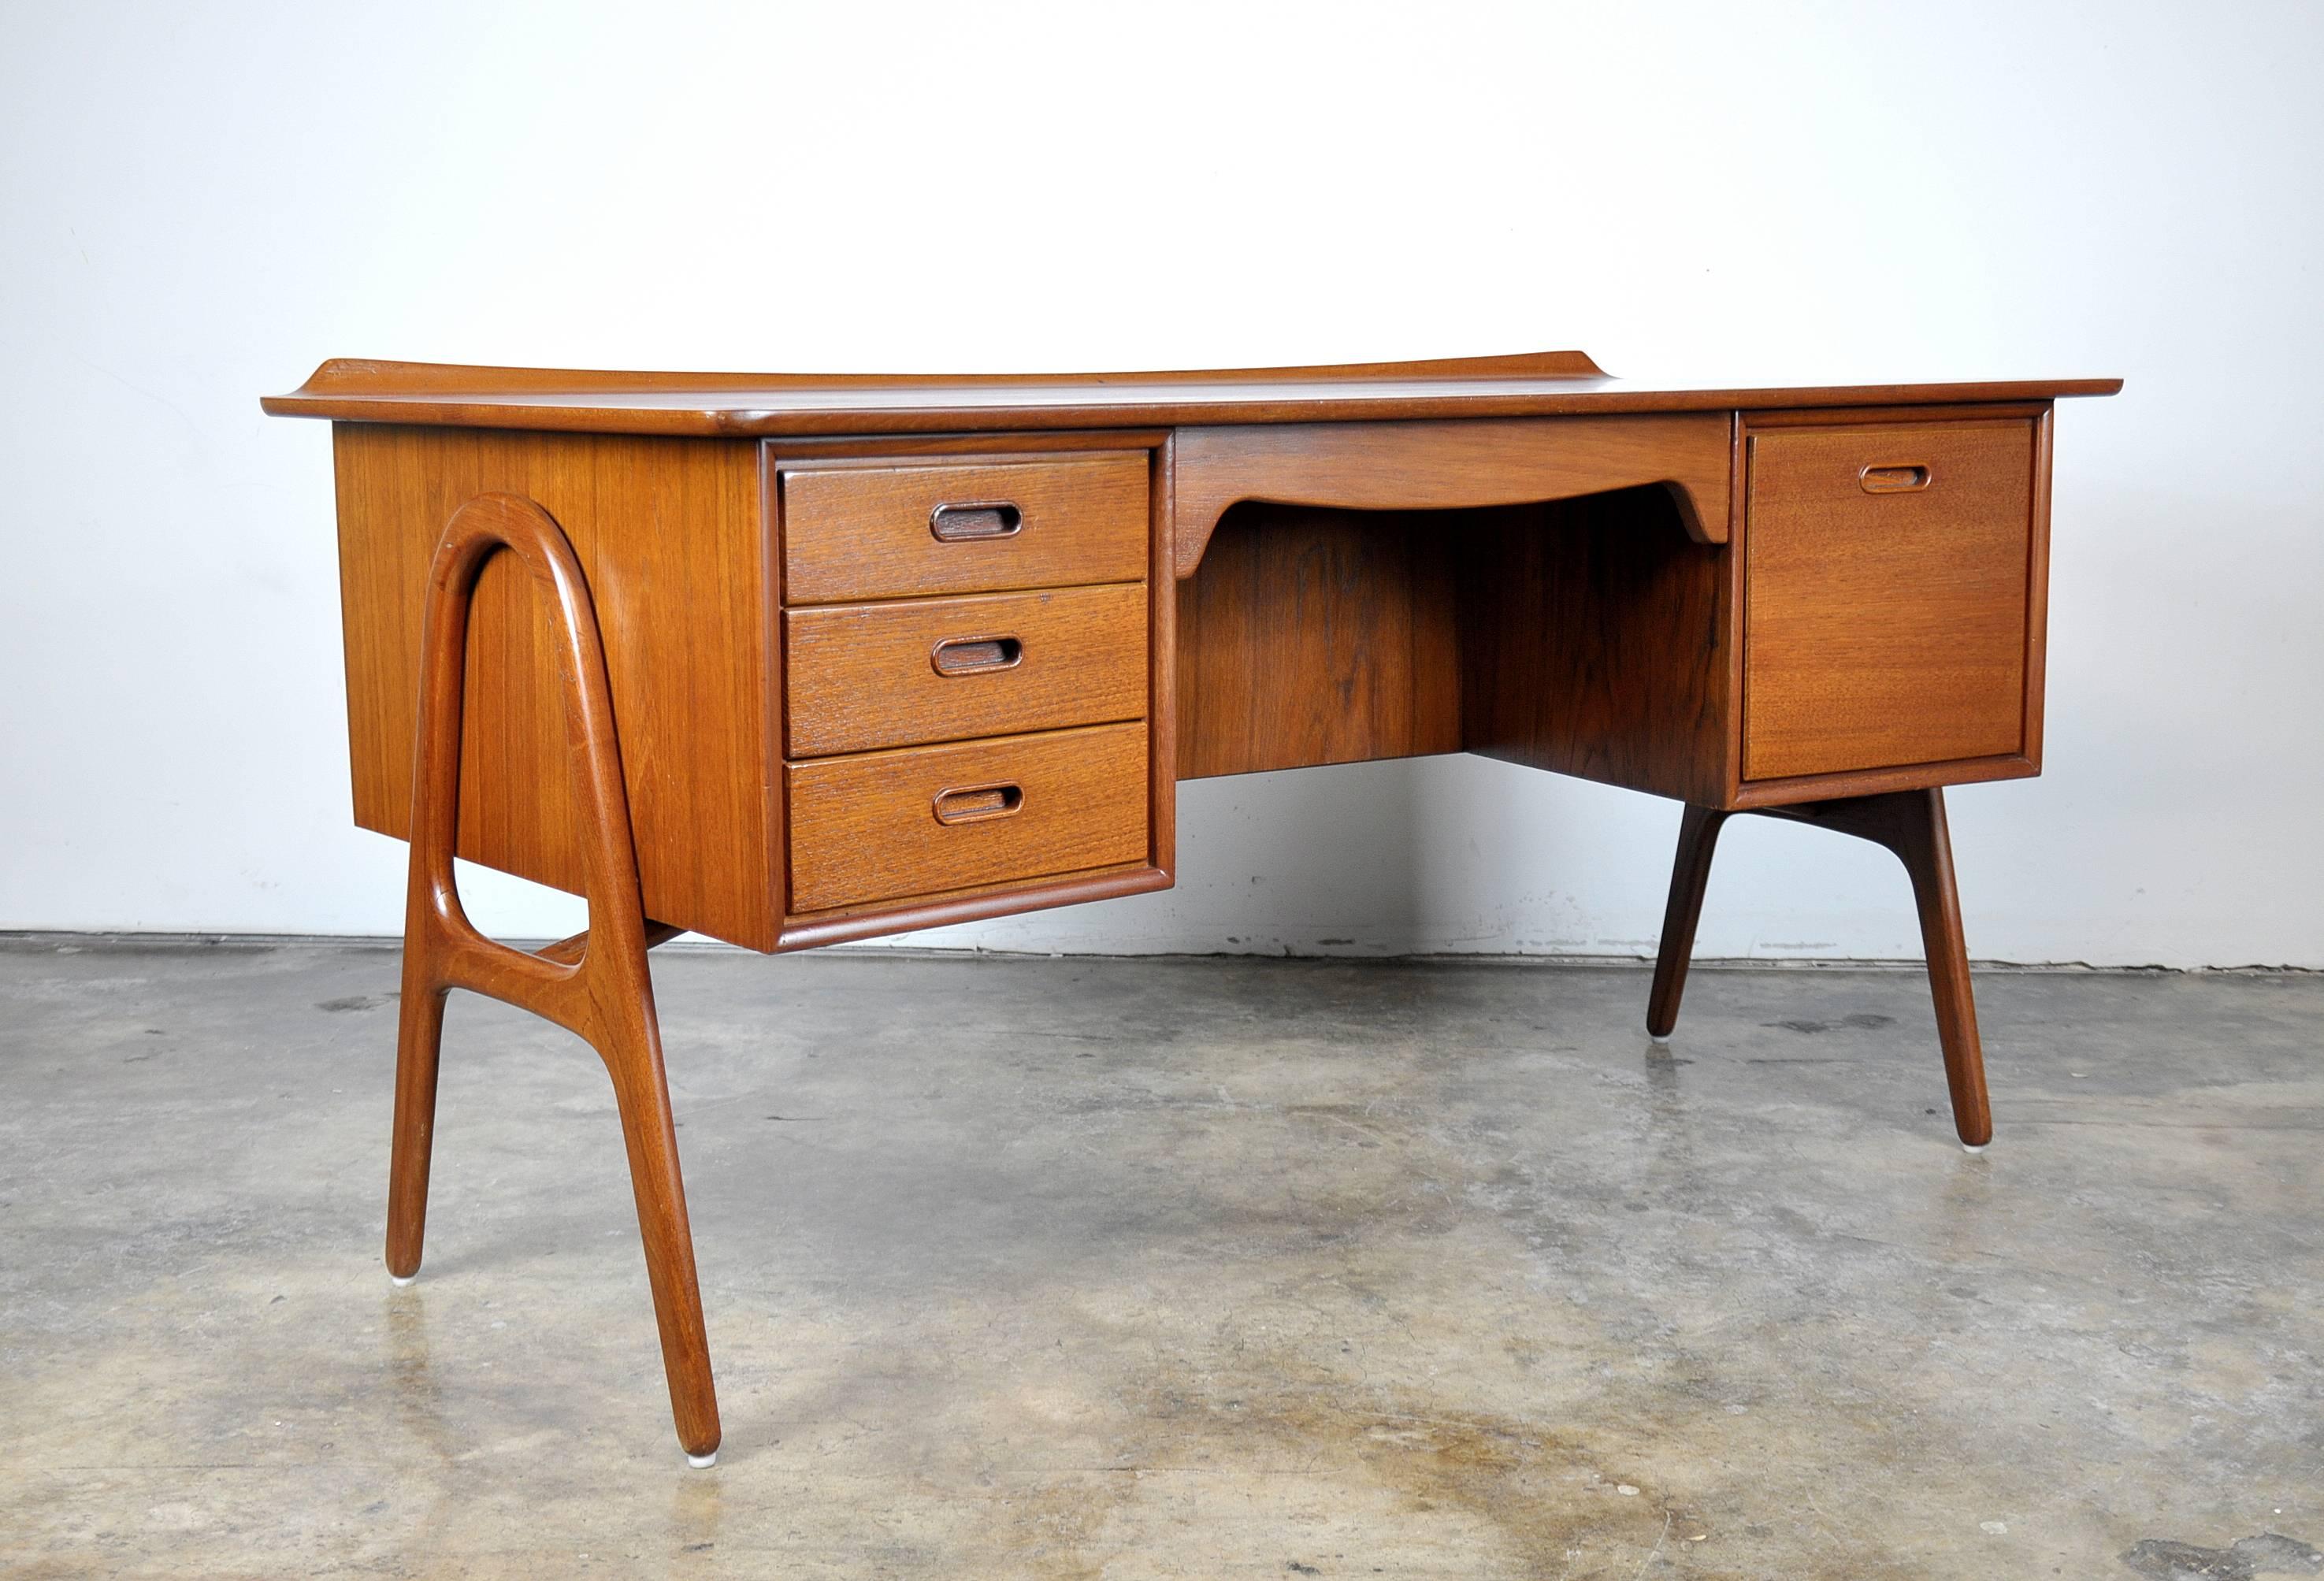 A gorgeous newly refinished Mid-Century Modern executive desk designed by Svend Aage Madsen and manufactured by Sigurd Hansen Mobelfabrik in the 1960s. The curved and beautifully sculpted desk features four drawers, one of which is for files and a